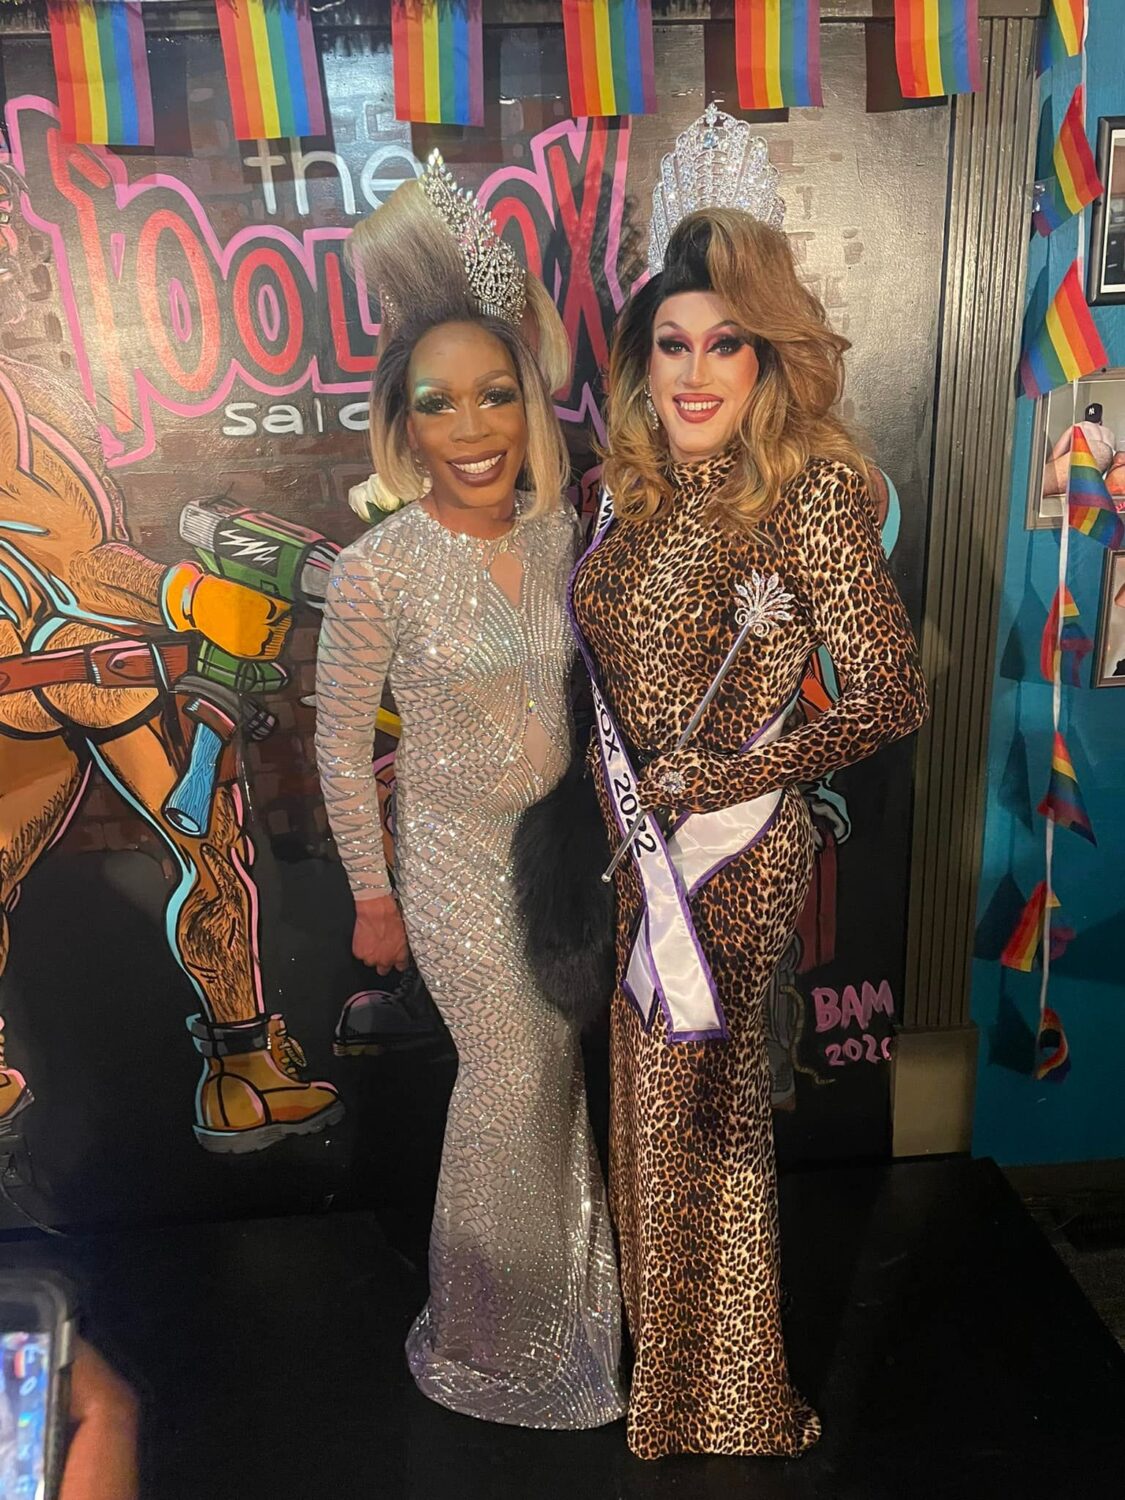 Milaye Duplaix and Soy Queen at Miss Toolbox pageant | Toolbox Saloon (Columbus, Ohio) | 4/24/2022